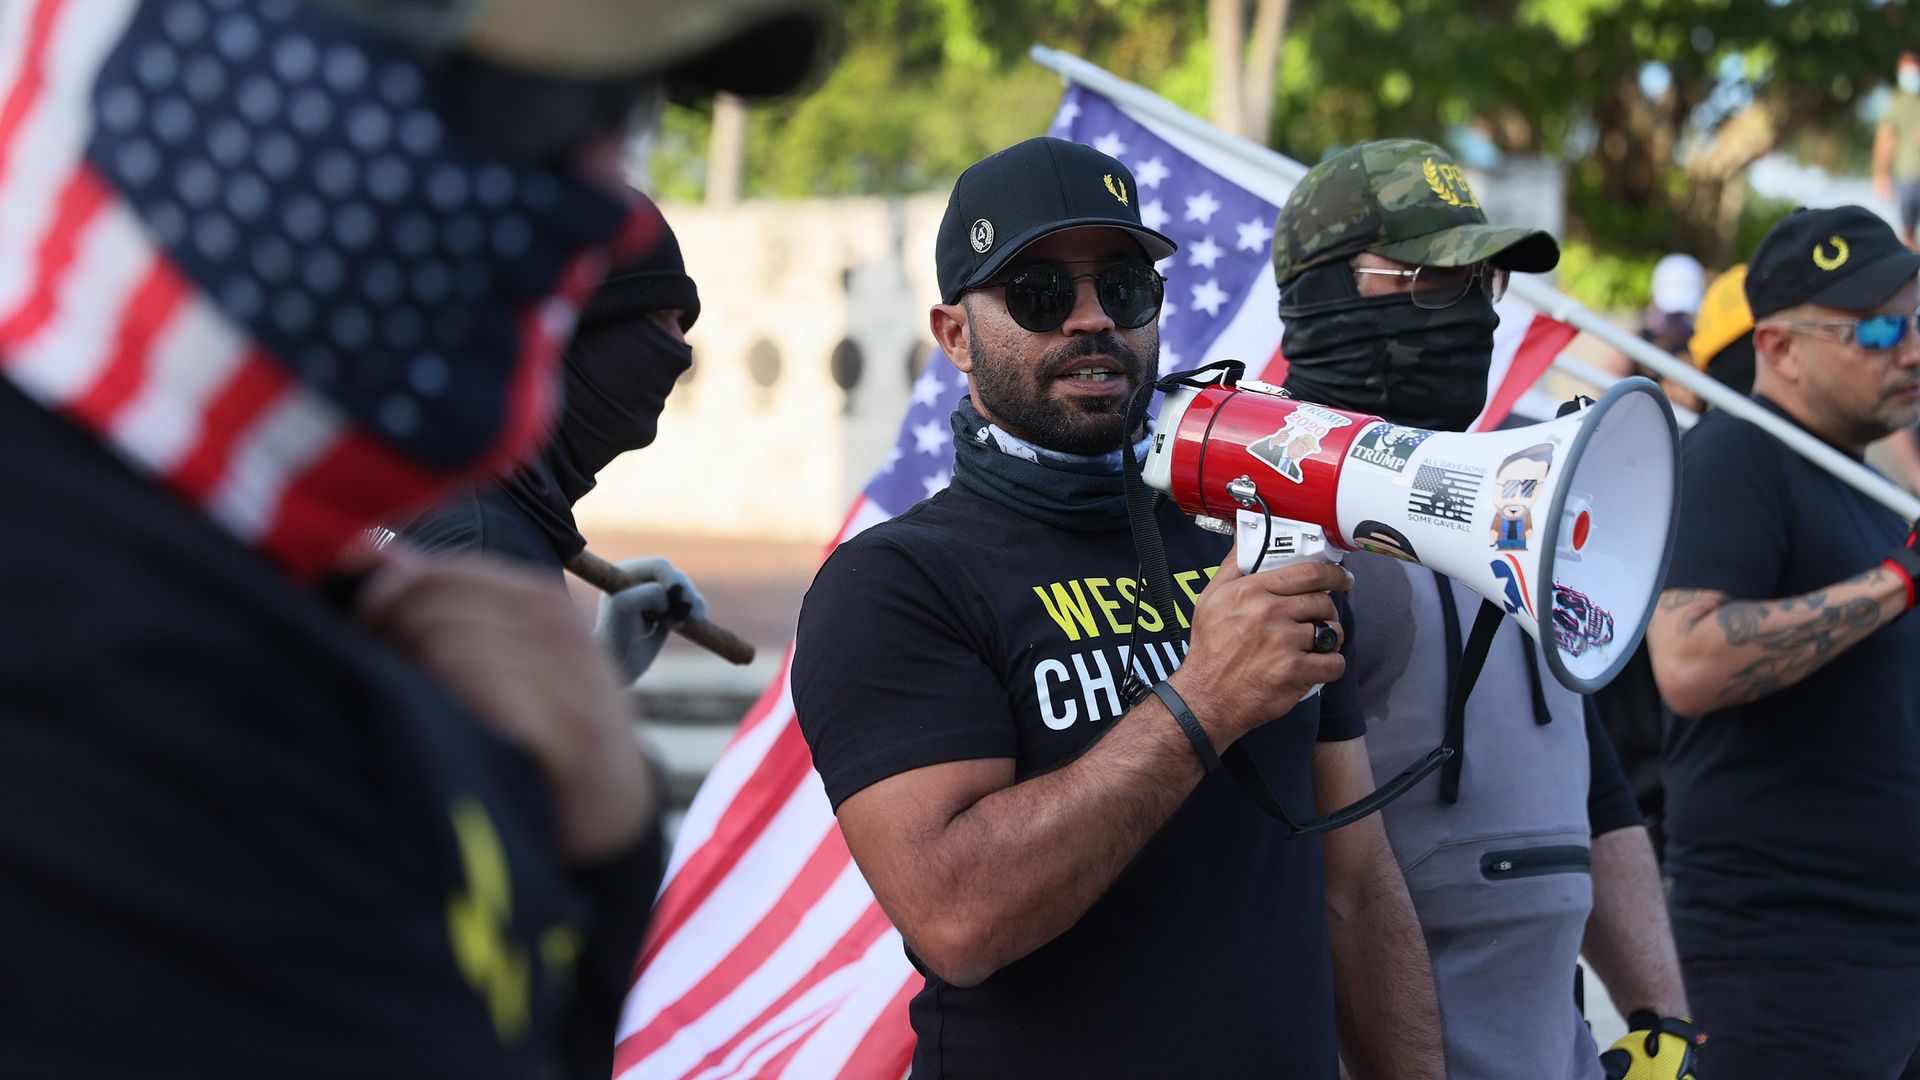 Photo of Enrique Tarrio holding a megaphone and standing with other people with American flags